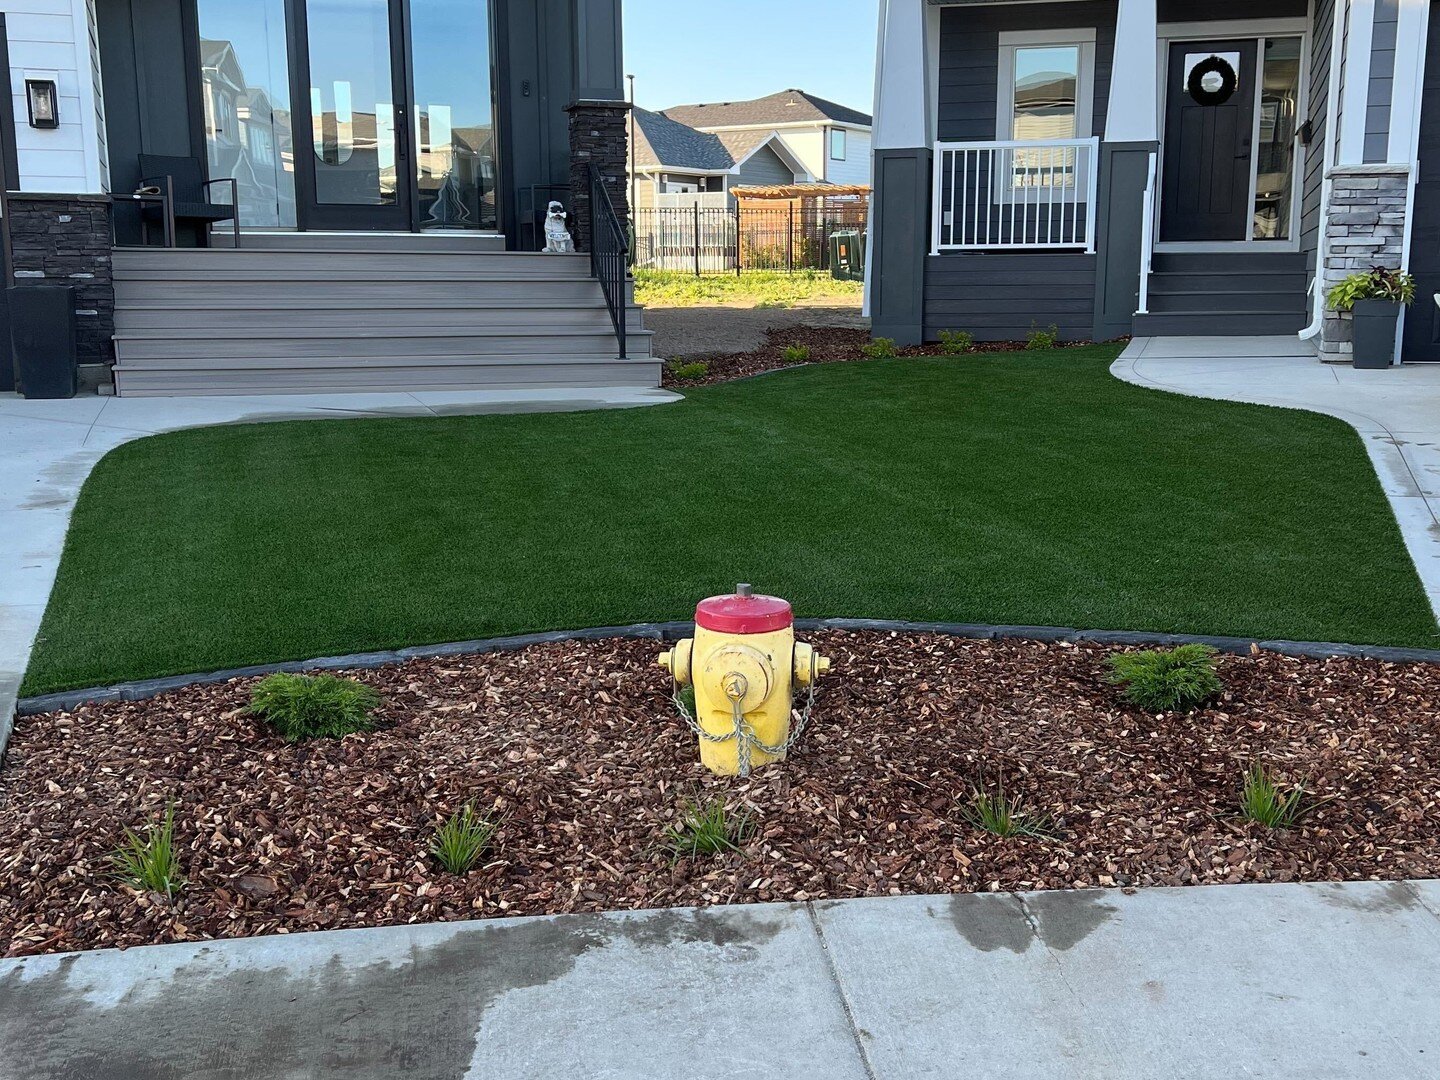 That is quite an upgrade! Artificial turf, mow edge, mulch and plants.
This shared front yard is a great way to keep both your and your neighbour's side looking wonderful!
.
.
.
#KeystoneOutdoorLiving #Saskatoon #LandscapeDesign #SwimmingPools #Patio